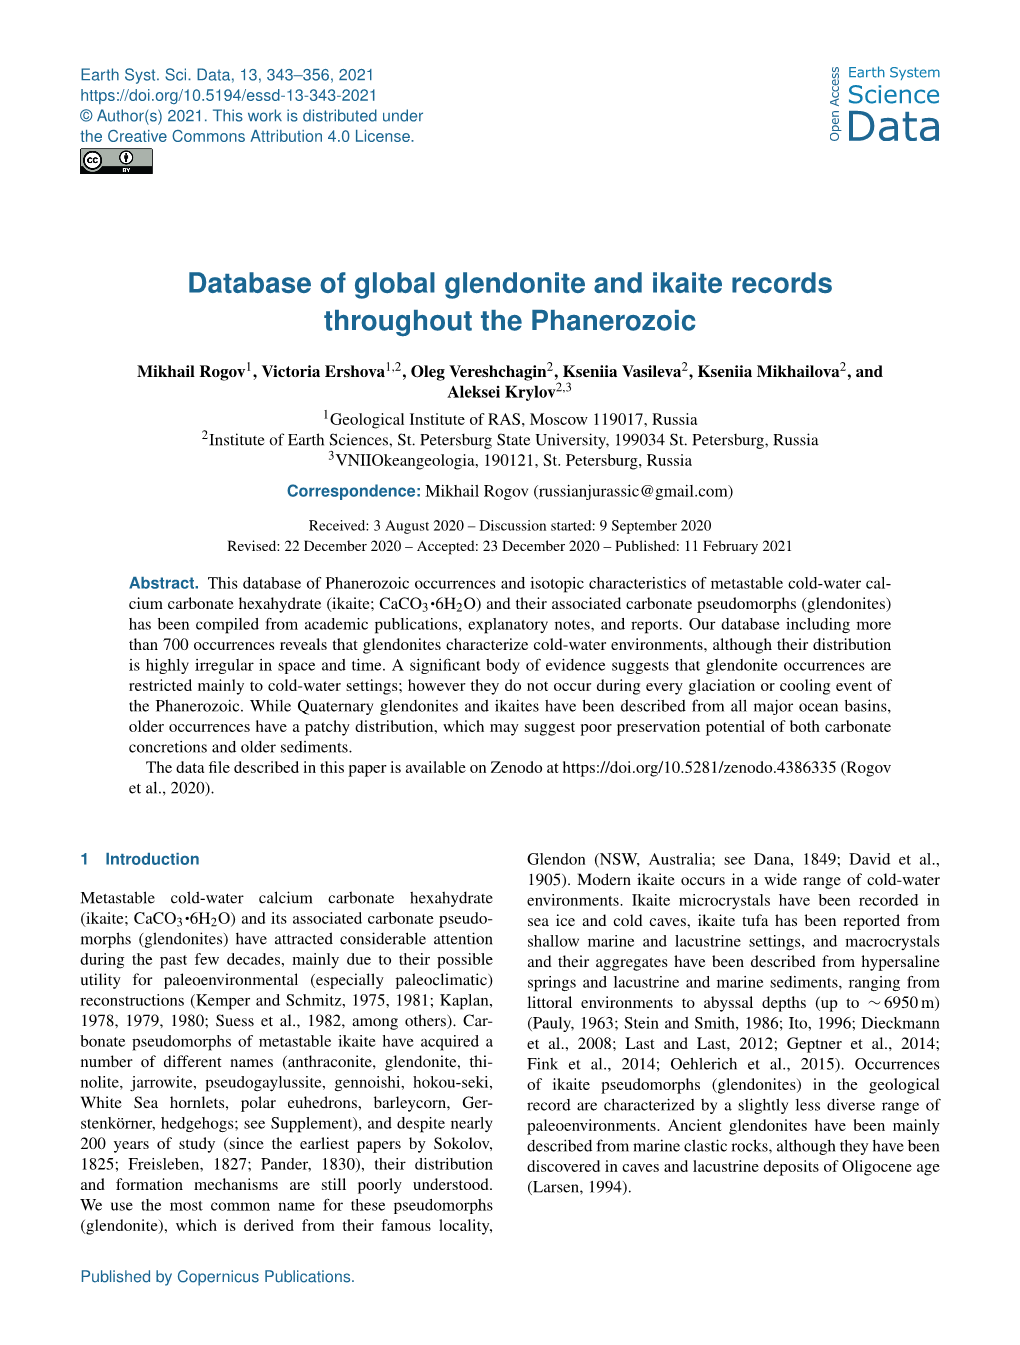 Database of Global Glendonite and Ikaite Records Throughout the Phanerozoic